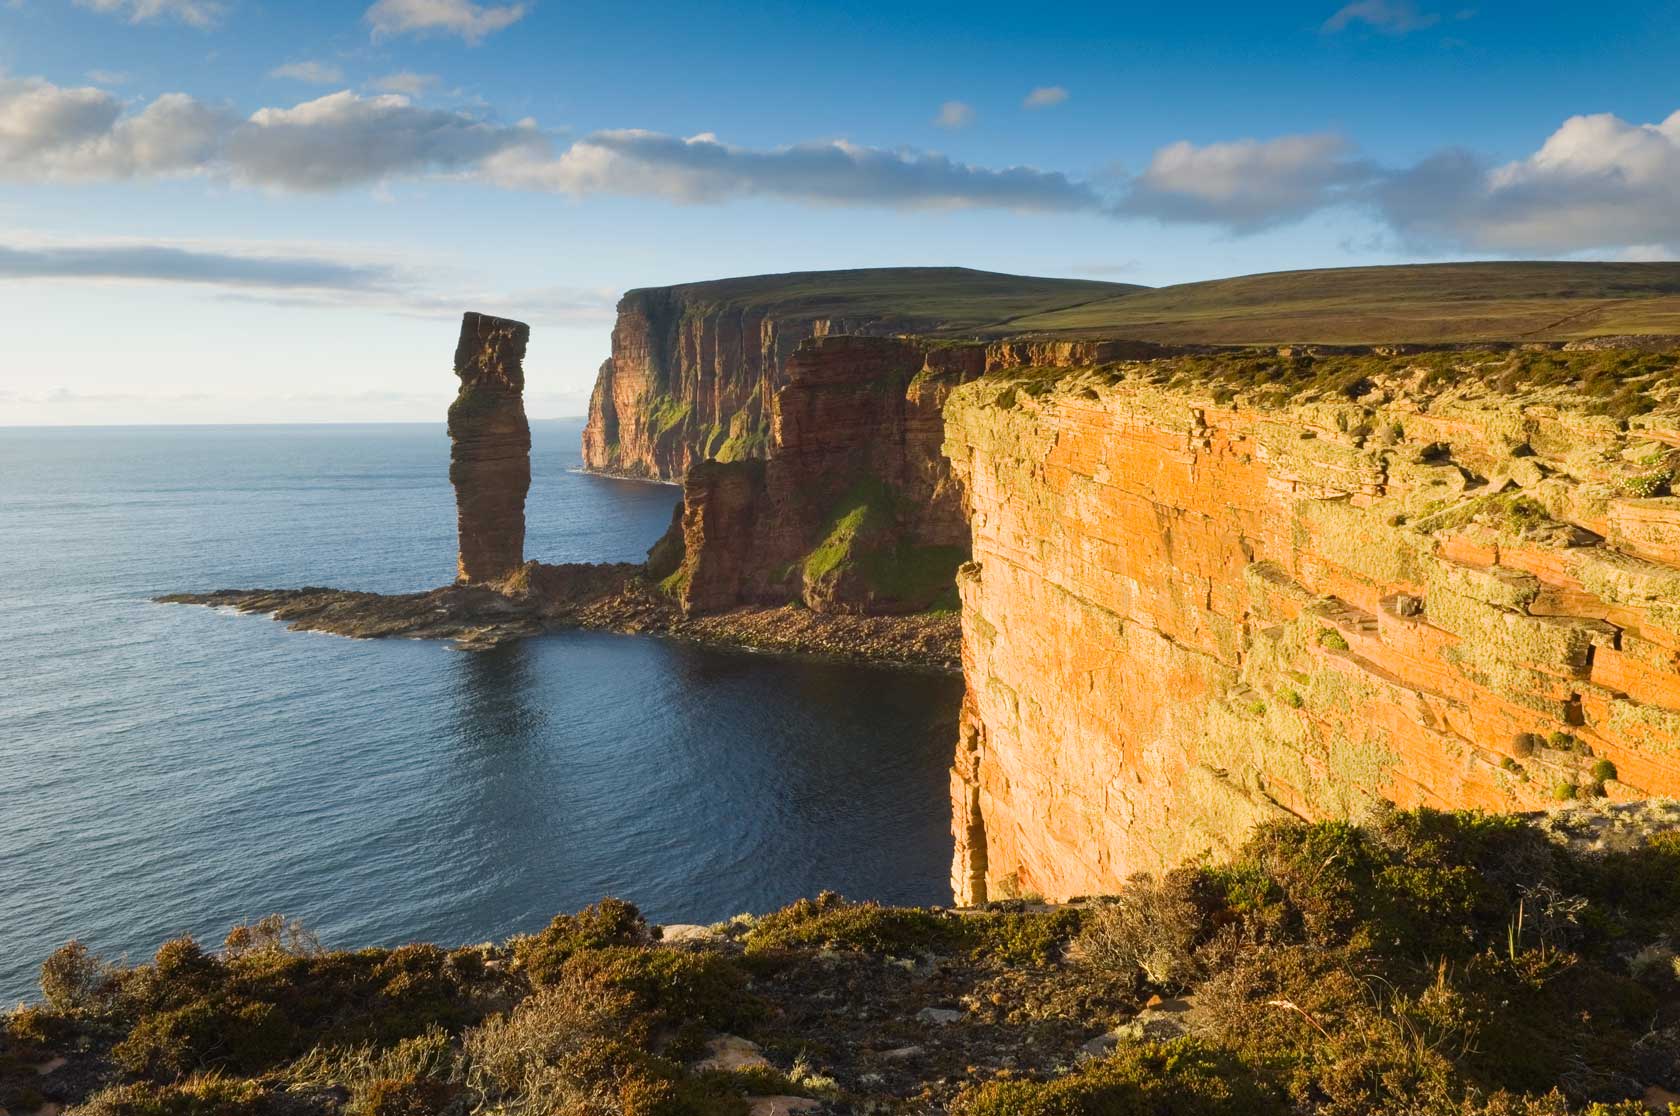 The Old Man of Hoy in evening light